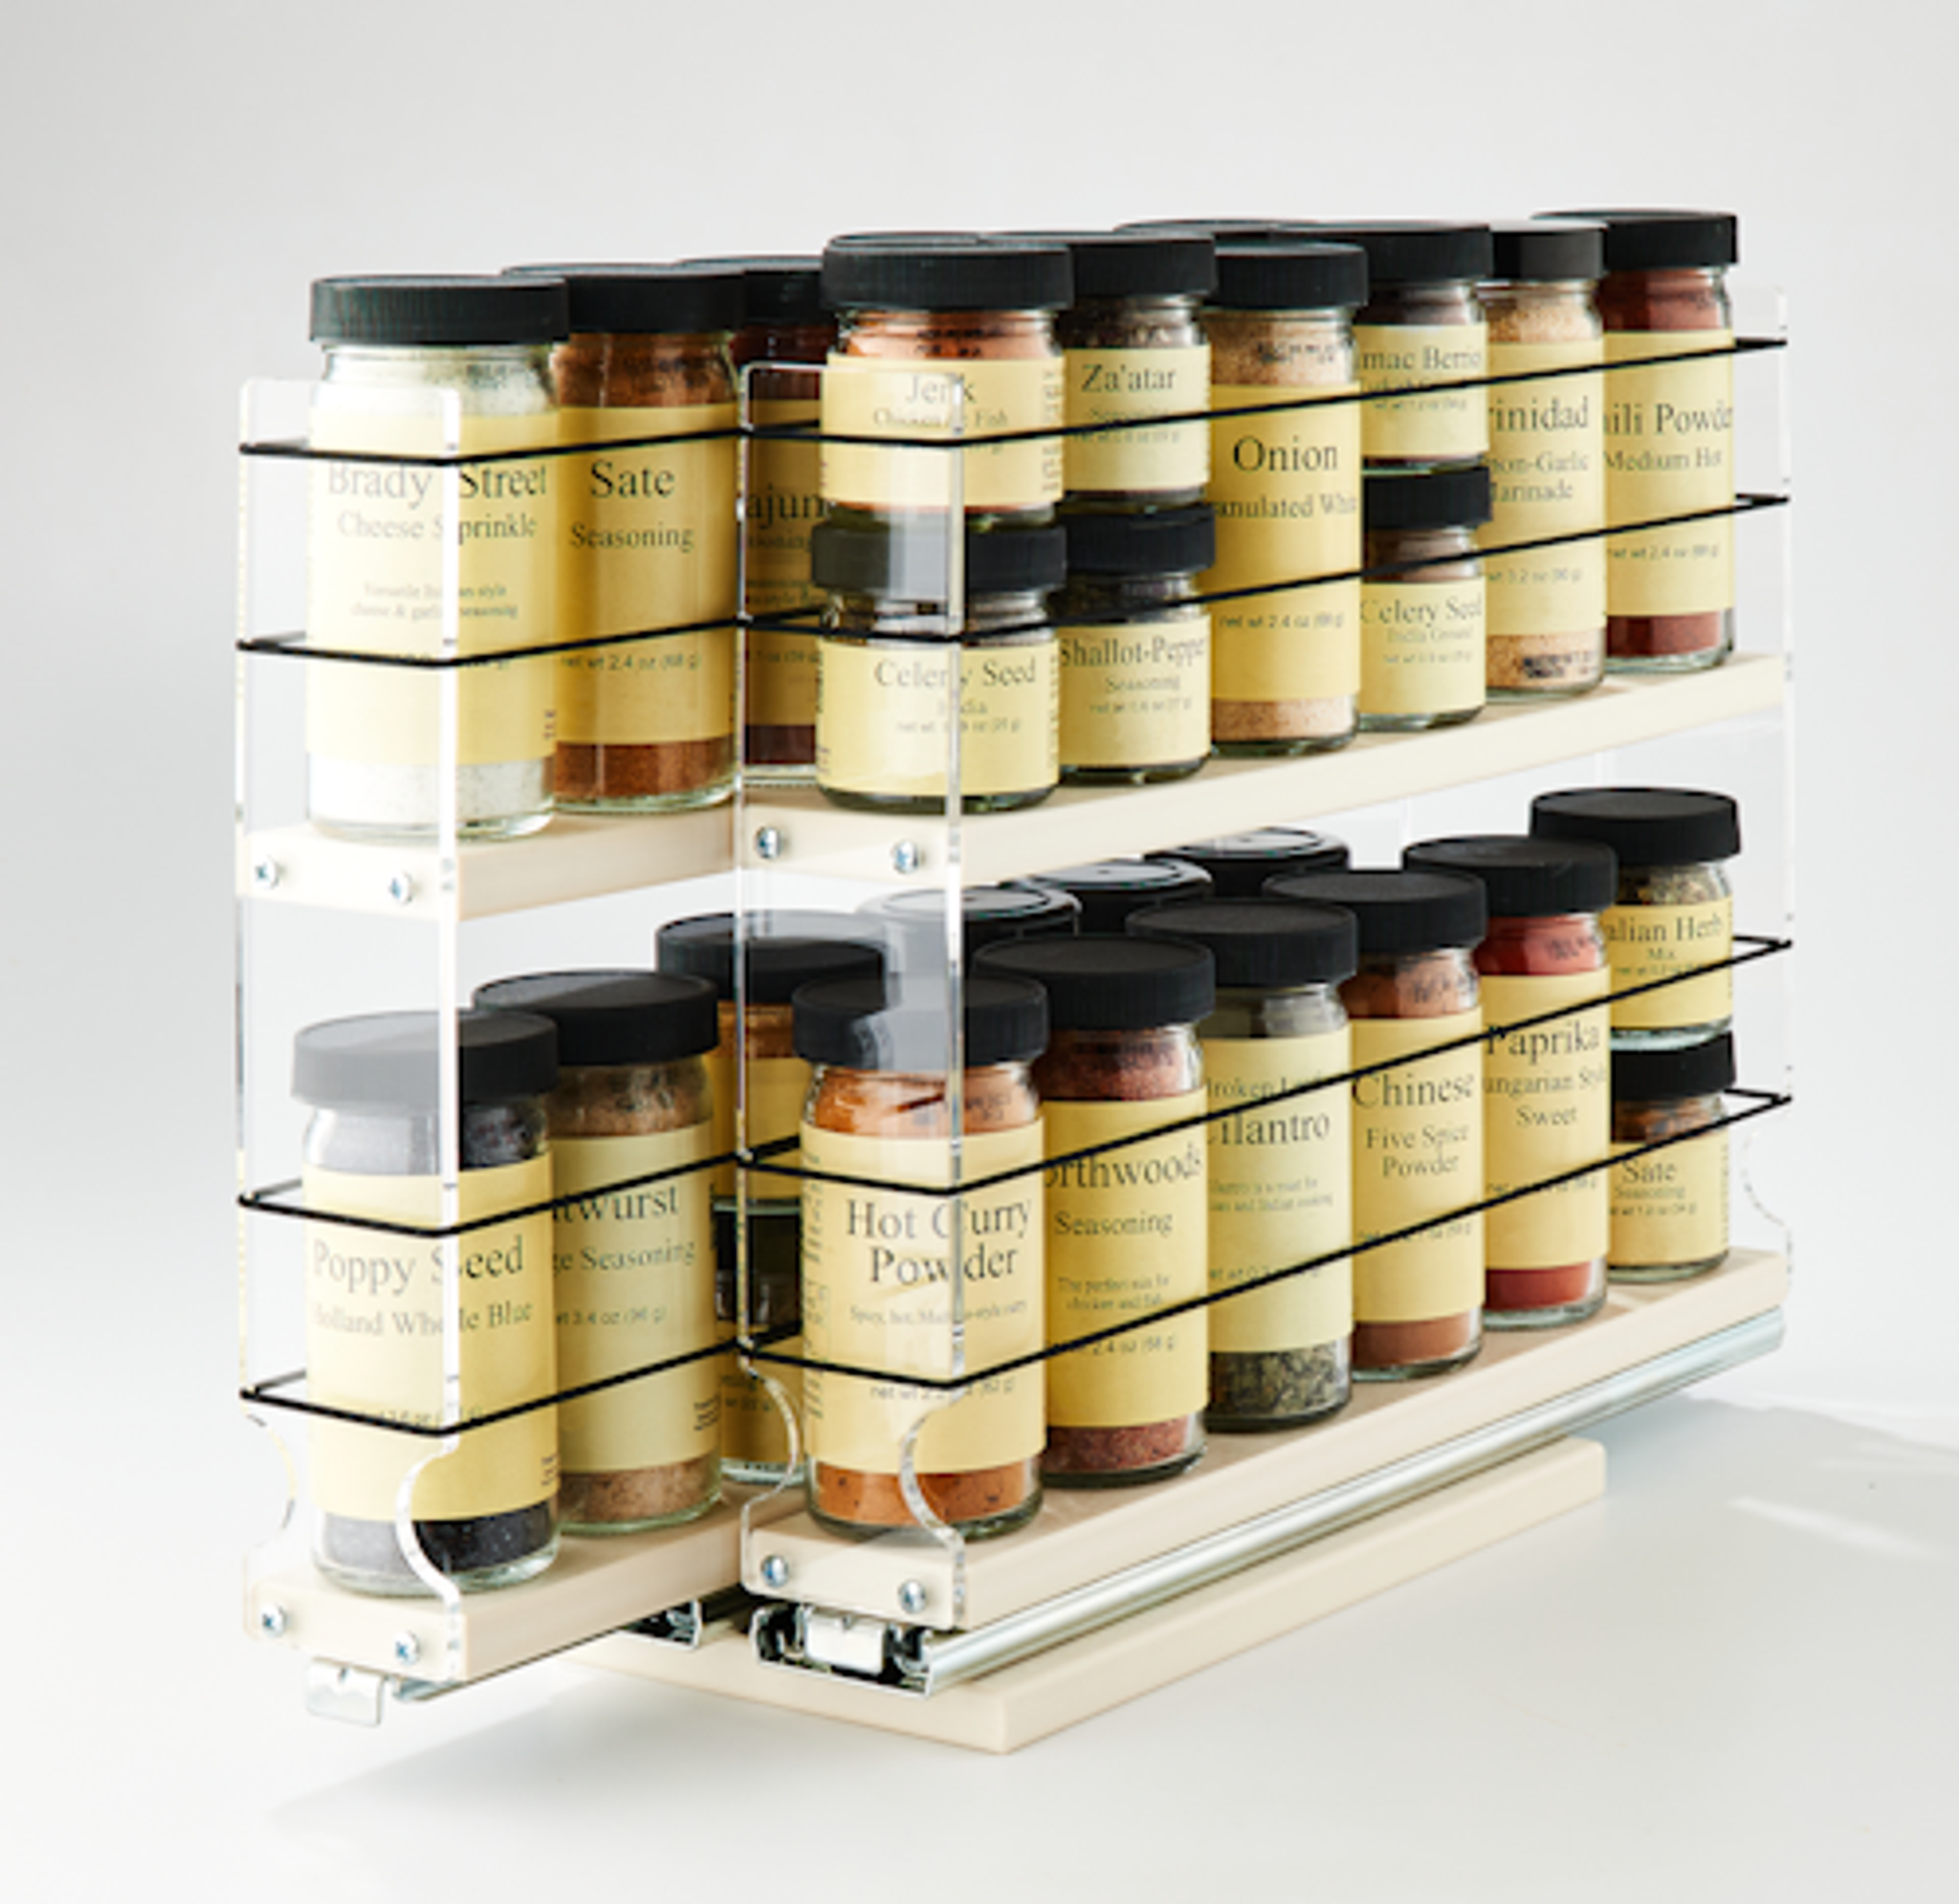 Vertical Spice 22x2x11 Spice Rack 2 Drawers 2 Tiers, Cream, 20 Jar Capacity with Flex-Sides, Sliding, Pullout, Partially Assembled